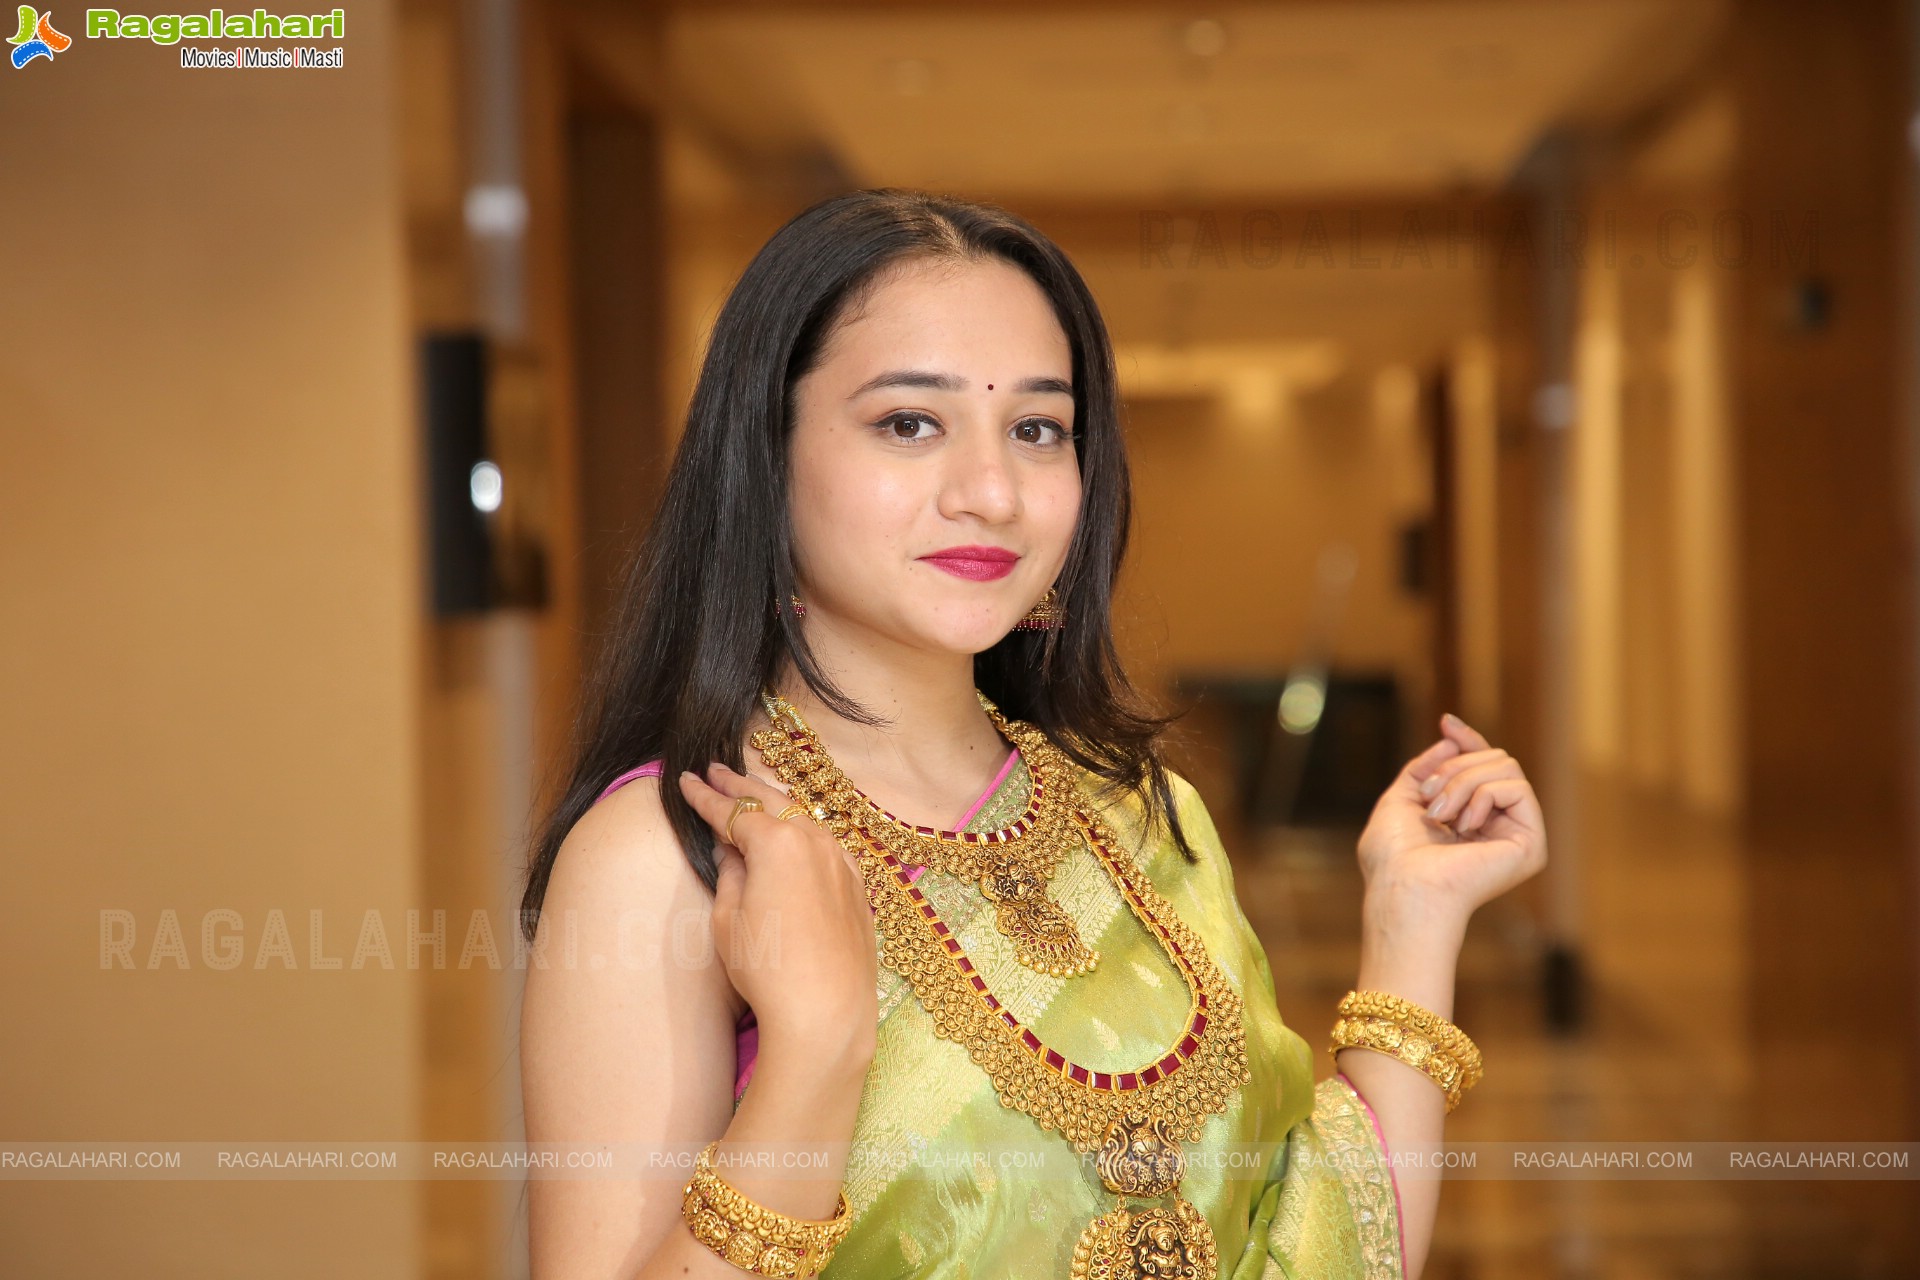 Bhuvaneshwari Showcases a Collection By Manepally Jewellers, HD Photo Gallery